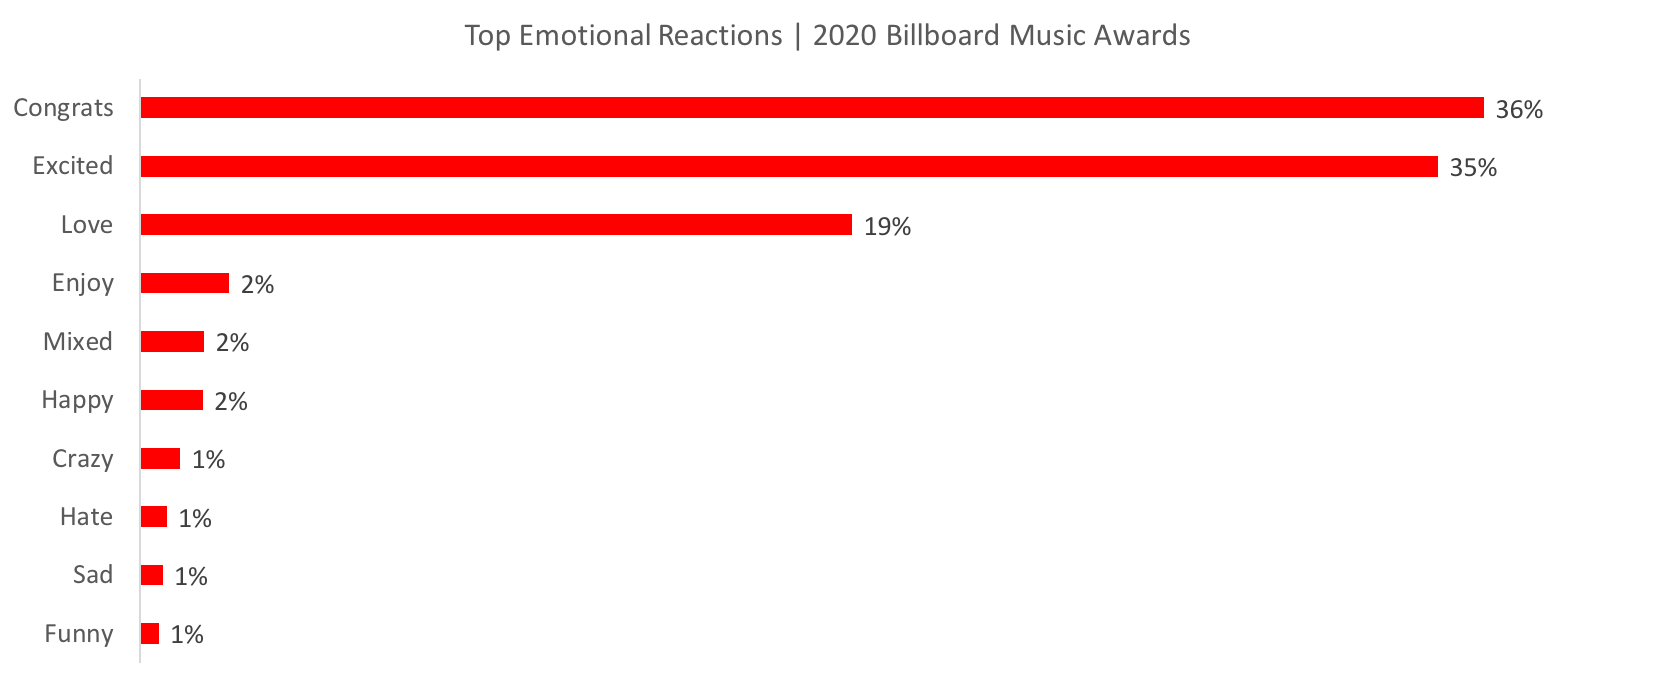 Source: Canvs Compare, 2020 Billboard Music Awards Airtime Window + / - 3 Hours